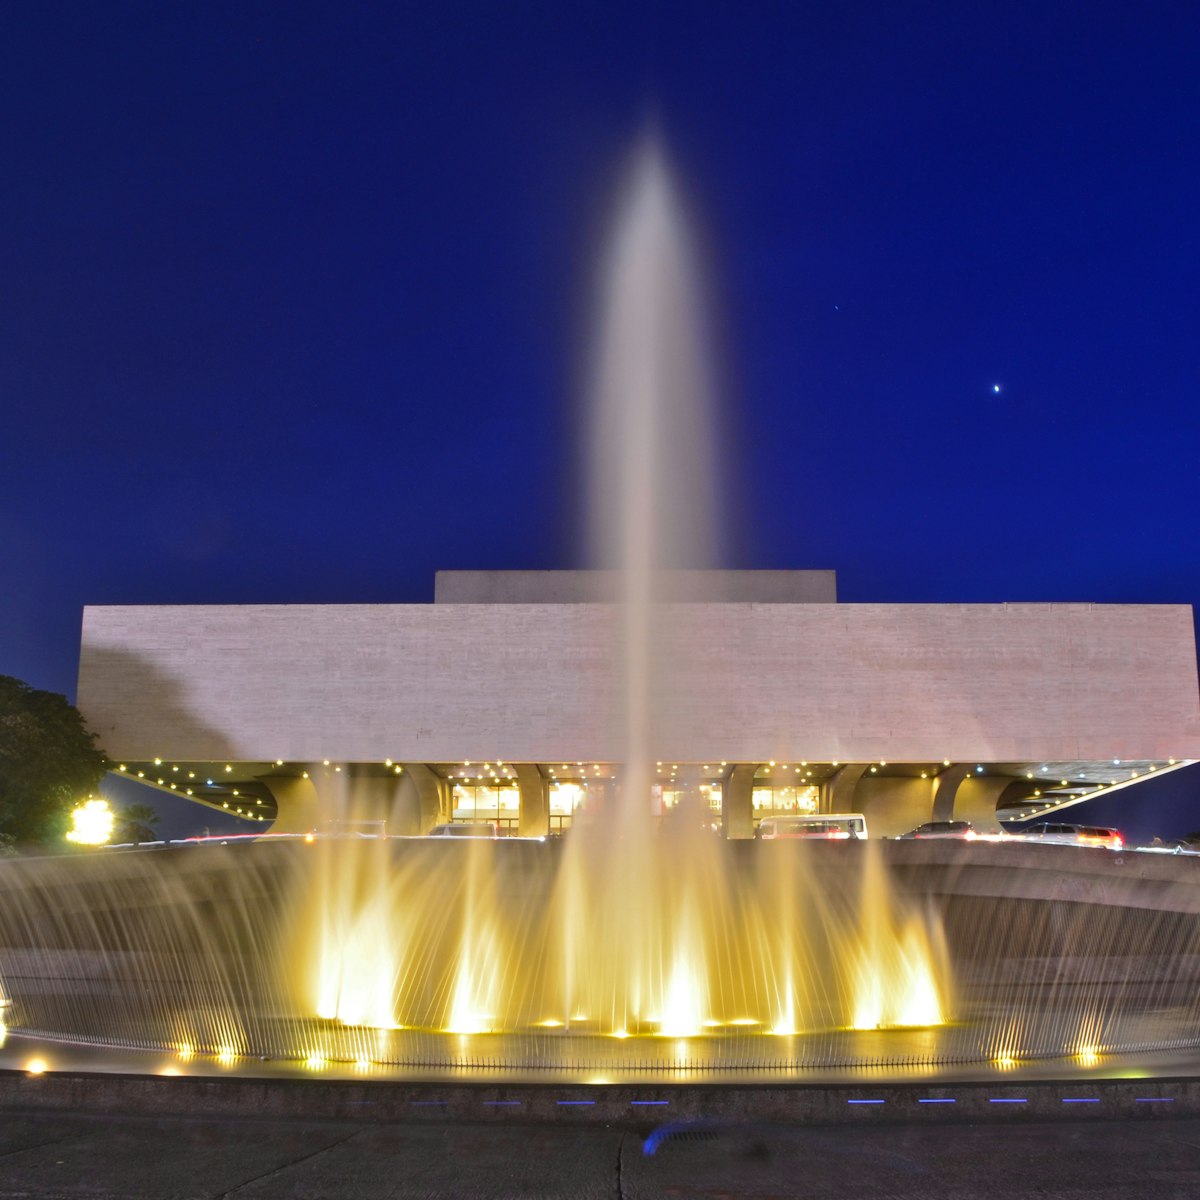 500px Photo ID: 130869553 - The National Theater at the CCP complex